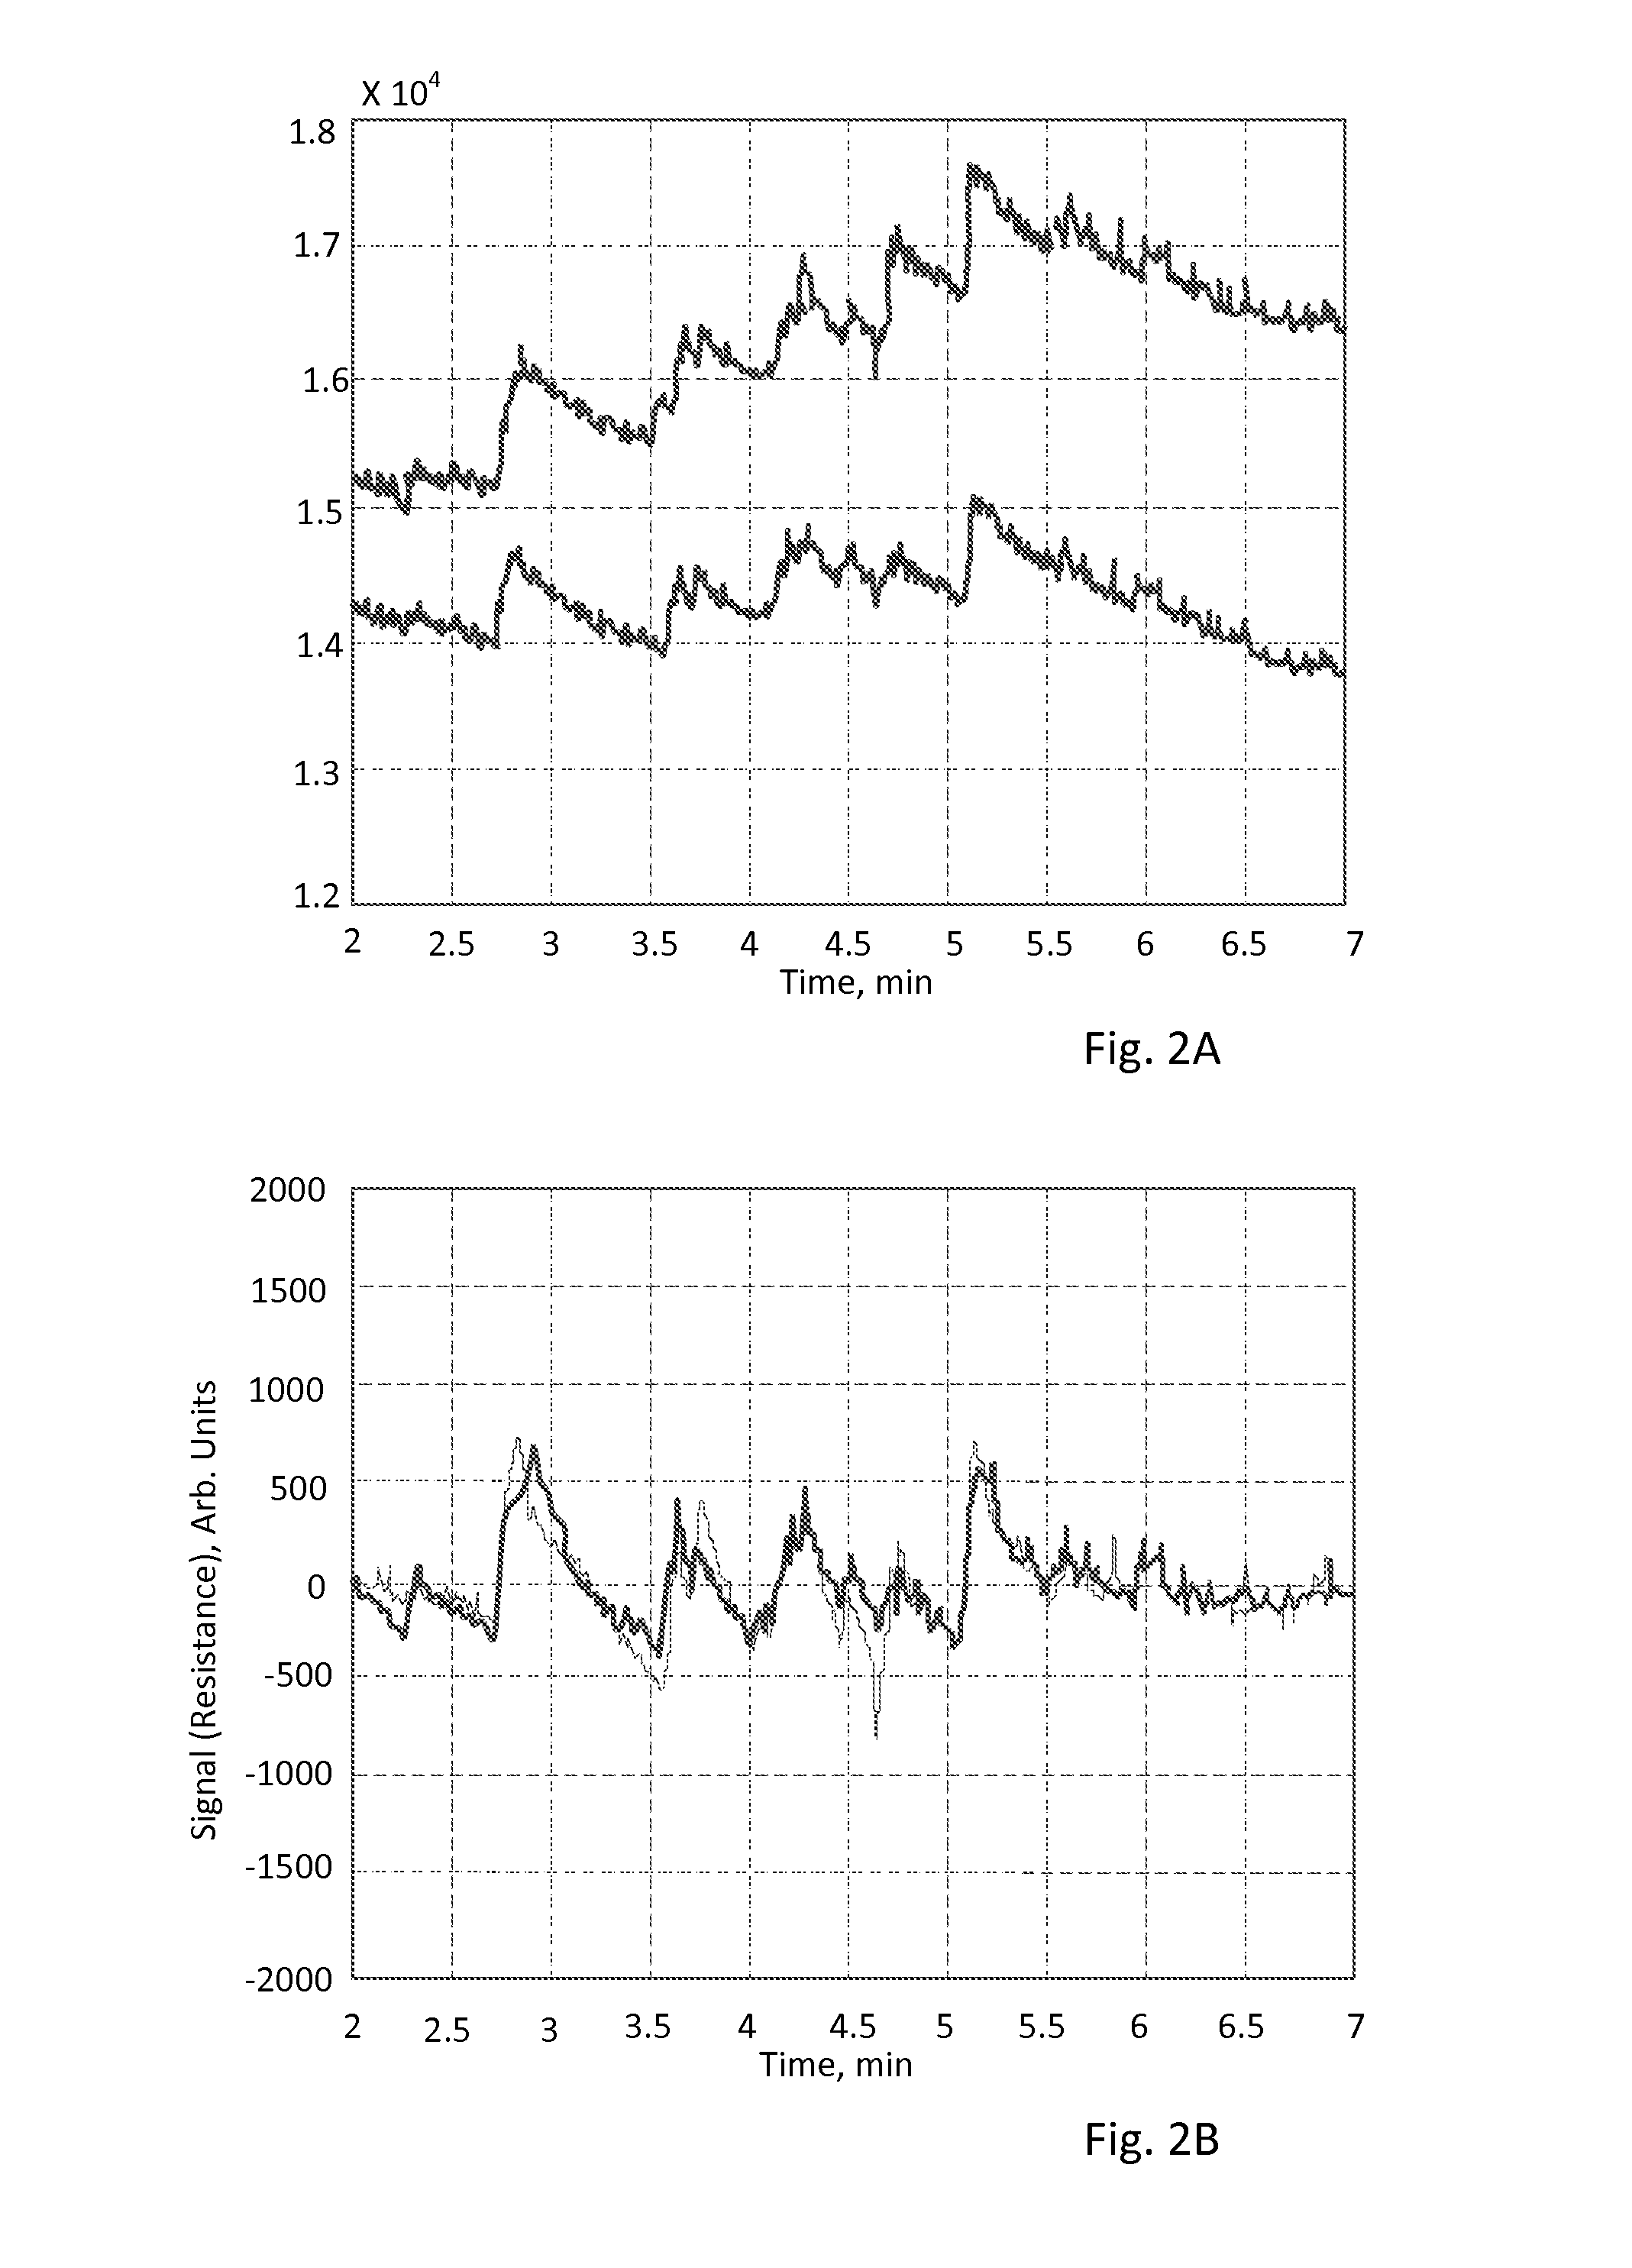 Method of Multichannel Galvanic Skin Response Detection for Improving Measurement Accuracy and Noise/Artifact Rejection